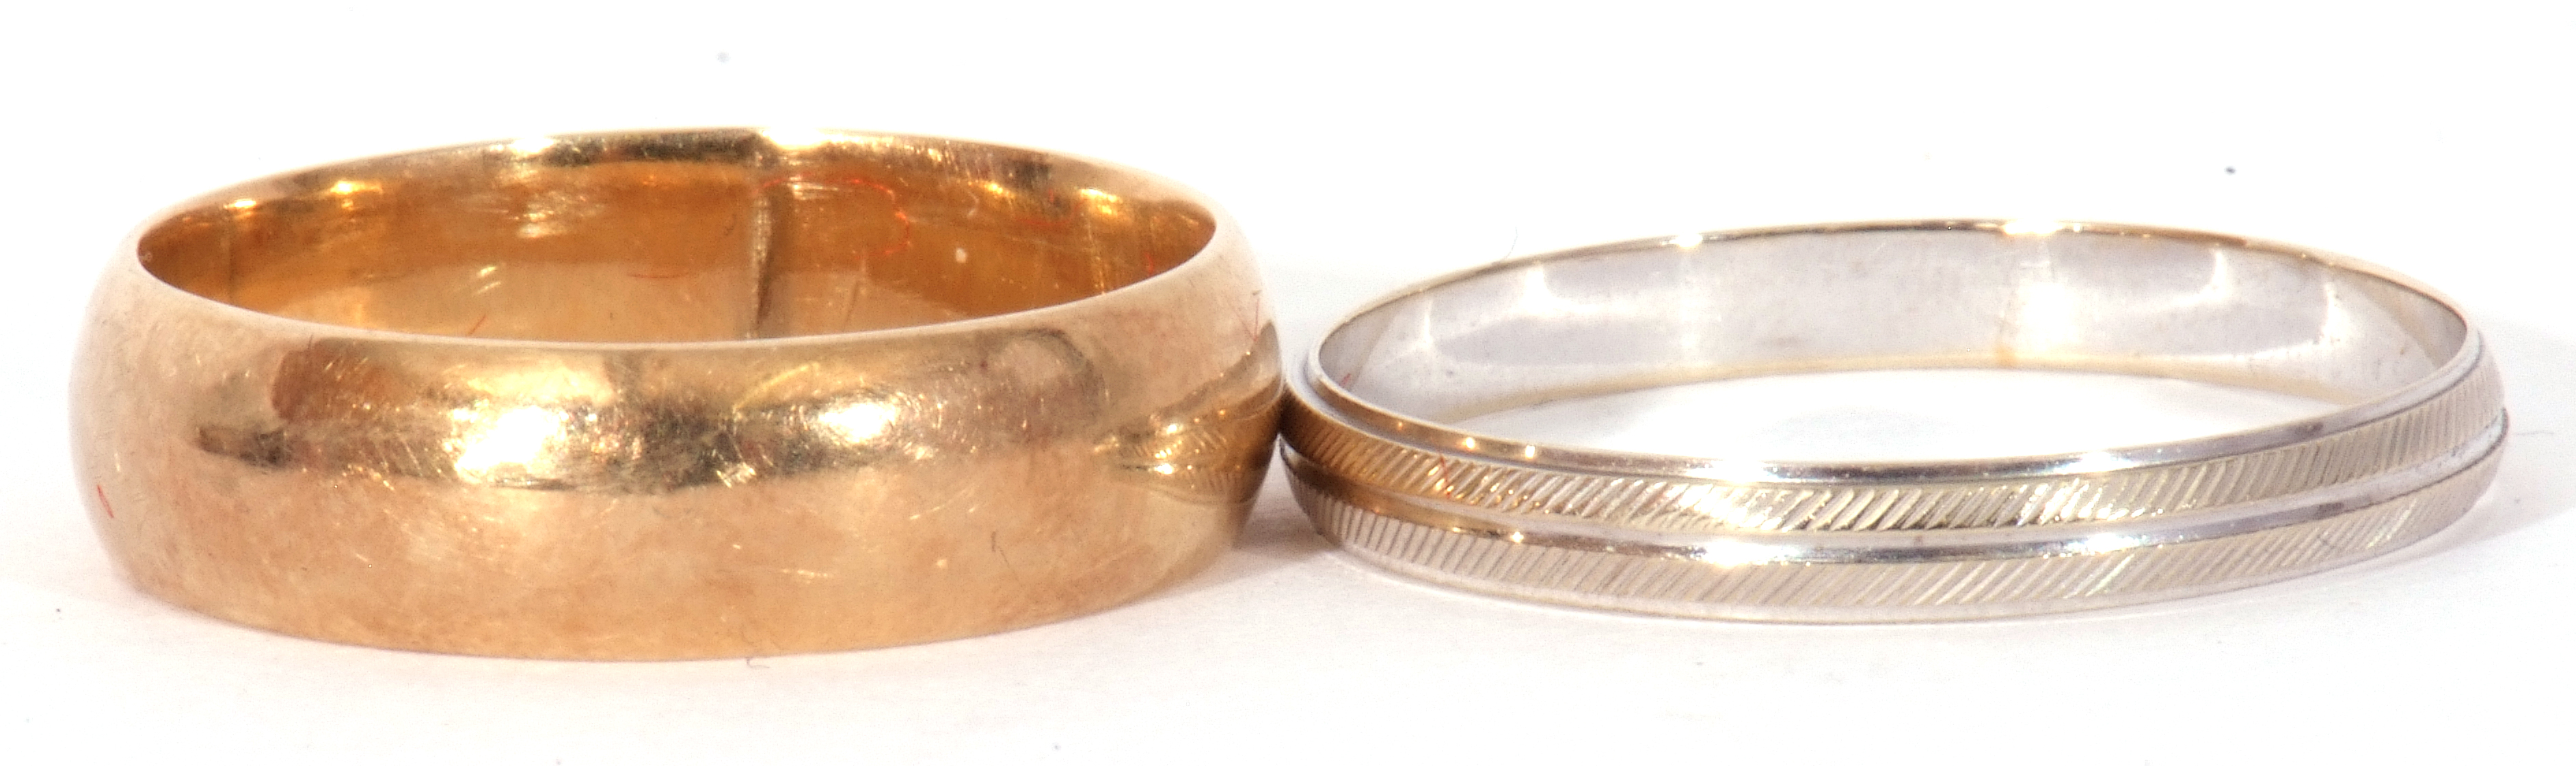 Mixed Lot: Two precious metal wedding ring, both stamped 585, a wide yellow plain polished ring - Image 2 of 5